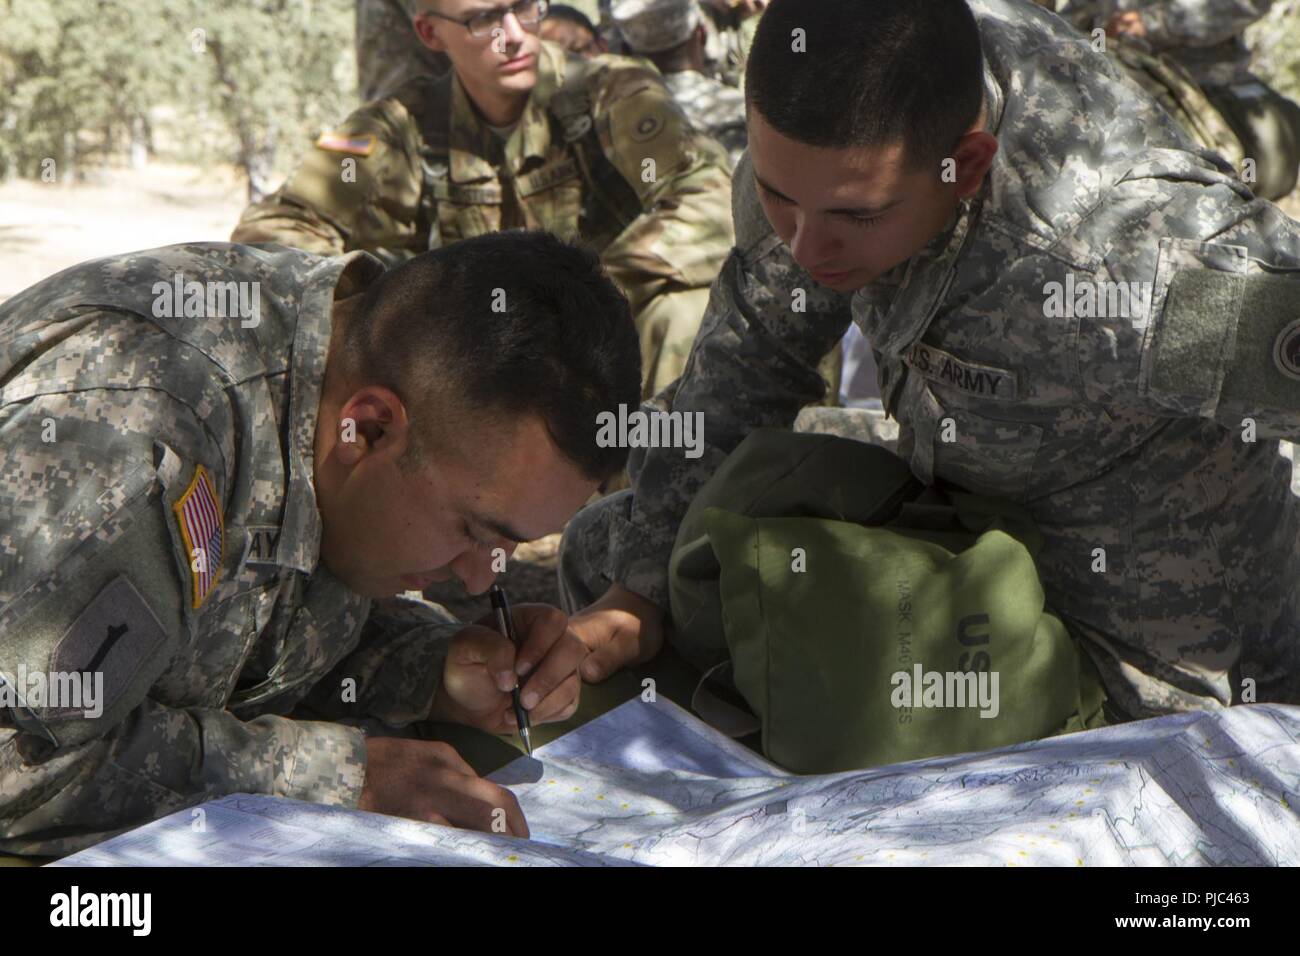 FORT HUNTER LIGGETT-- U.S. Army Sgt. Manuel Pelago and Spc. Rosario Manzanedo of the 348th Transportation Company sharpen their map reading skills during the 91st Training Division's Combat Support Training Exercise (CSTX 91-18-01) on July 11, 2018 in Ft. Hunter Liggett, California. The CSTX 91-18-01 ensures America’s Army Reserve units are trained to deploy bringing capable, combat-ready, and lethal firepower in support of the Army and our joint partners anywhere in the world. Stock Photo